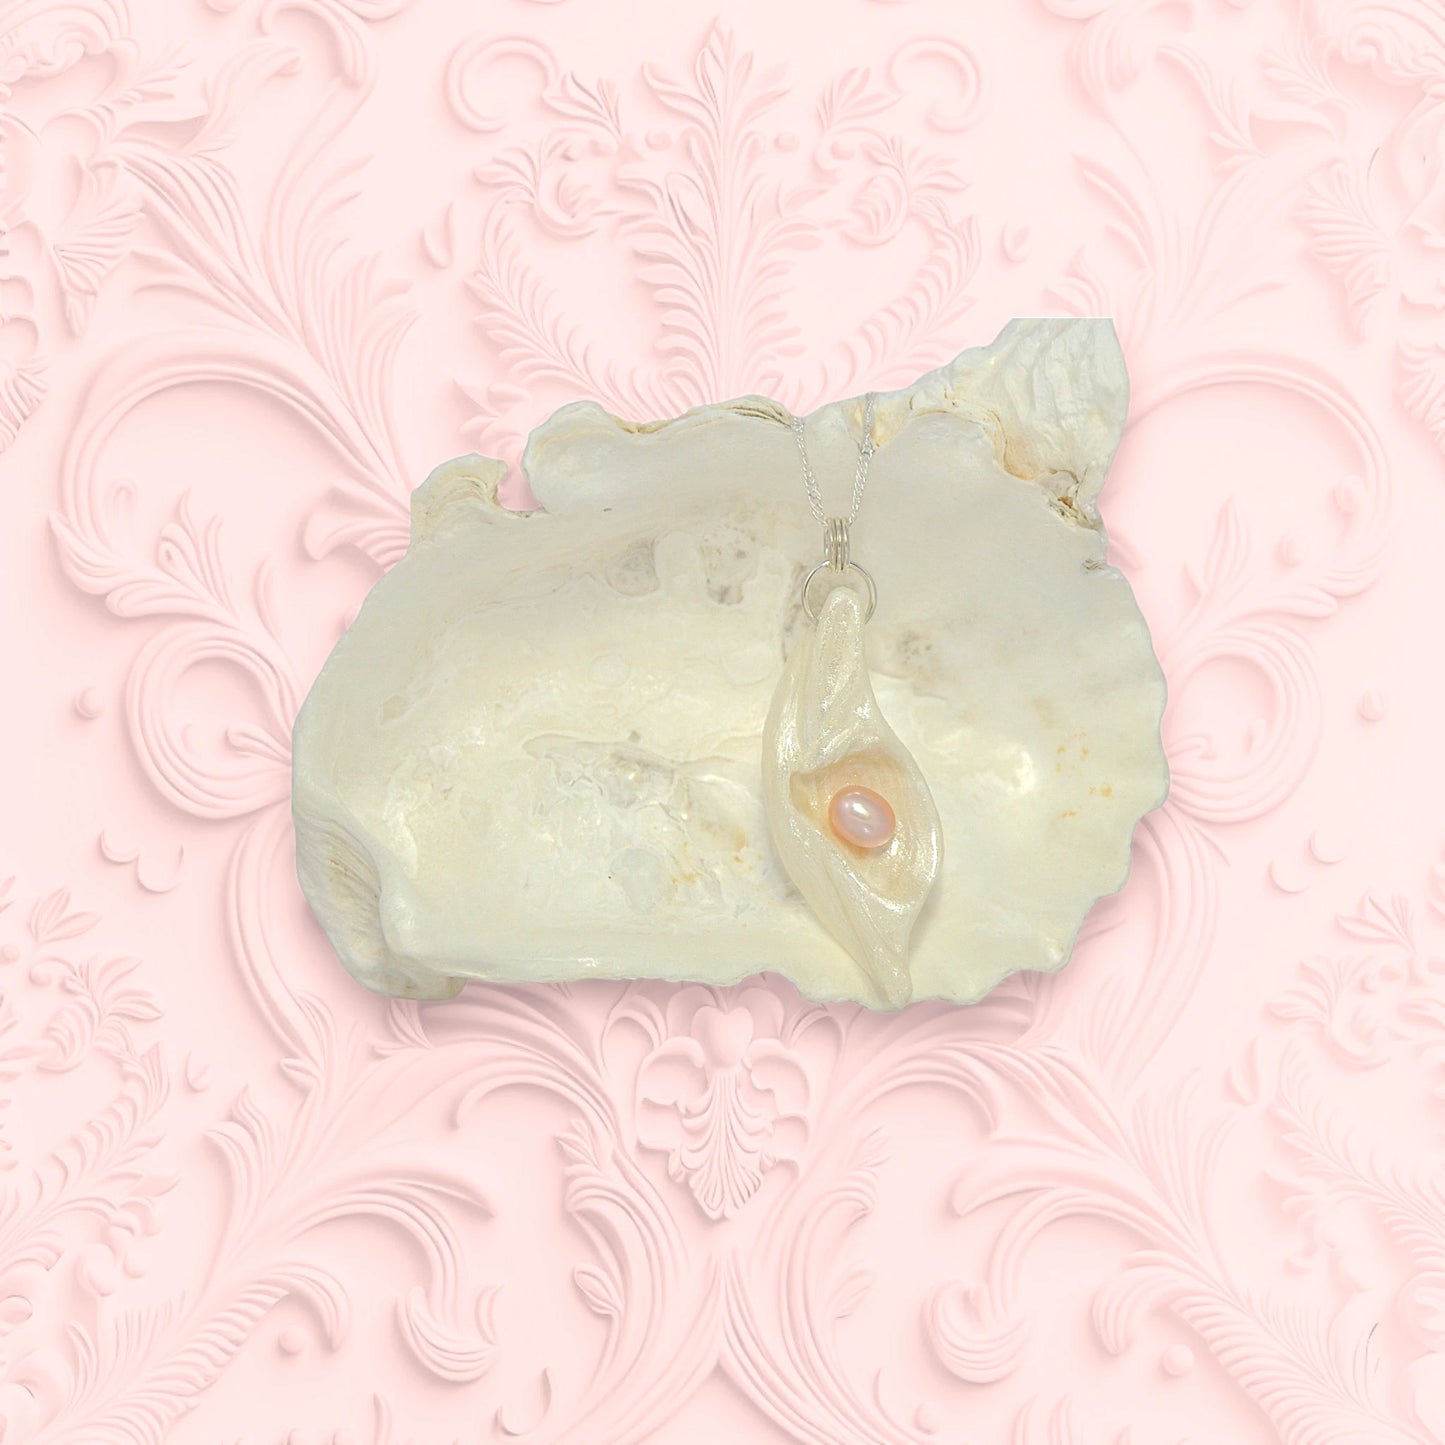 Glow natural seashell pendant with a pink freshwater pearl. 